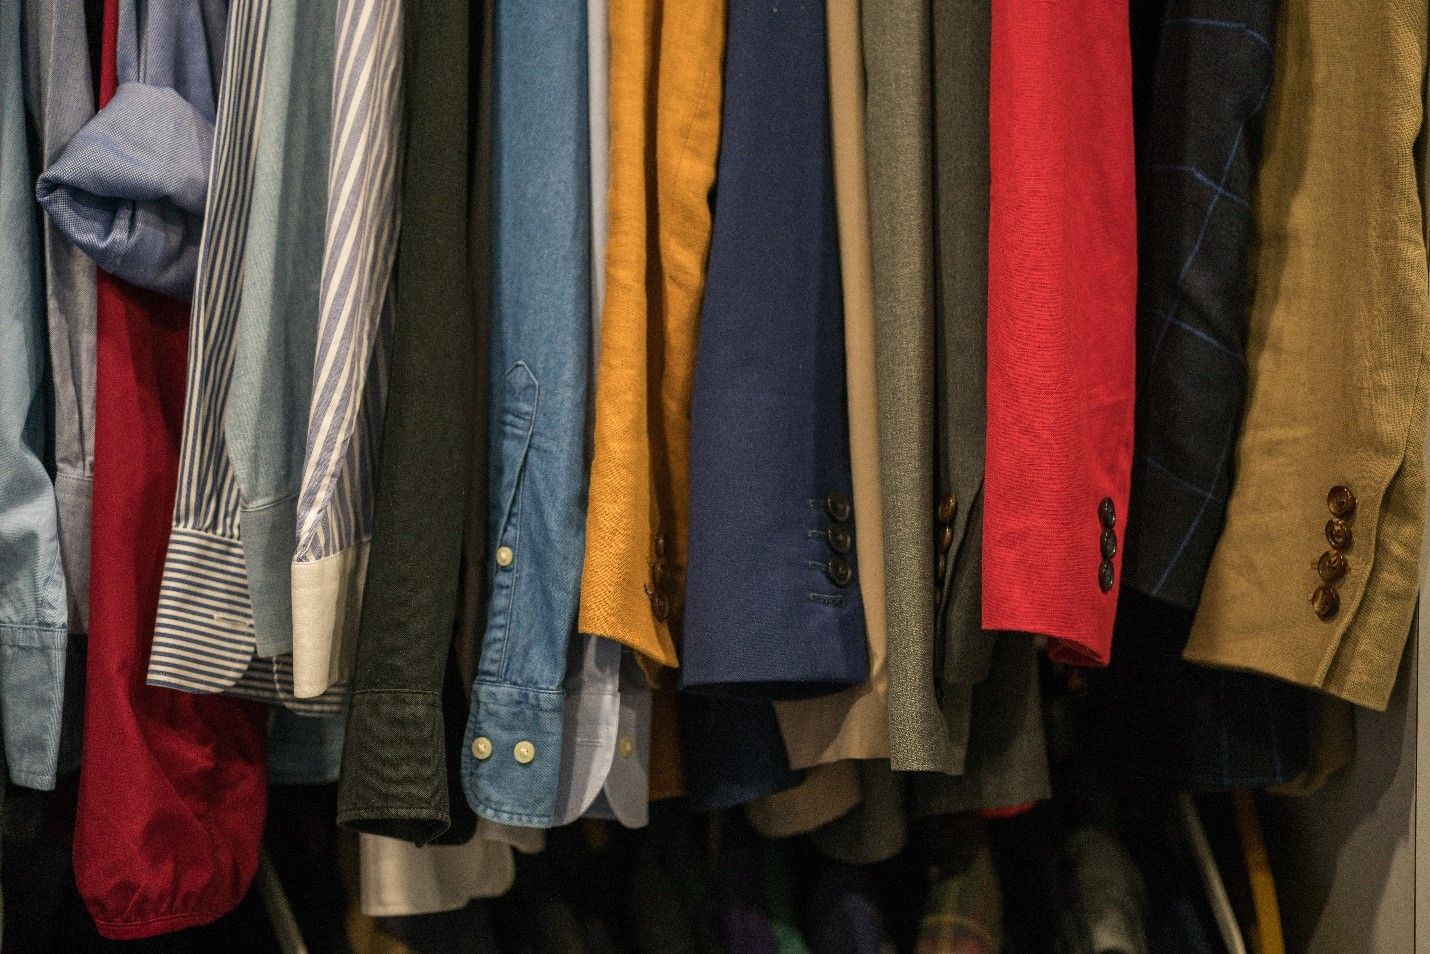 Donate Old Clothing to Reduce Solid Waste in Your Community